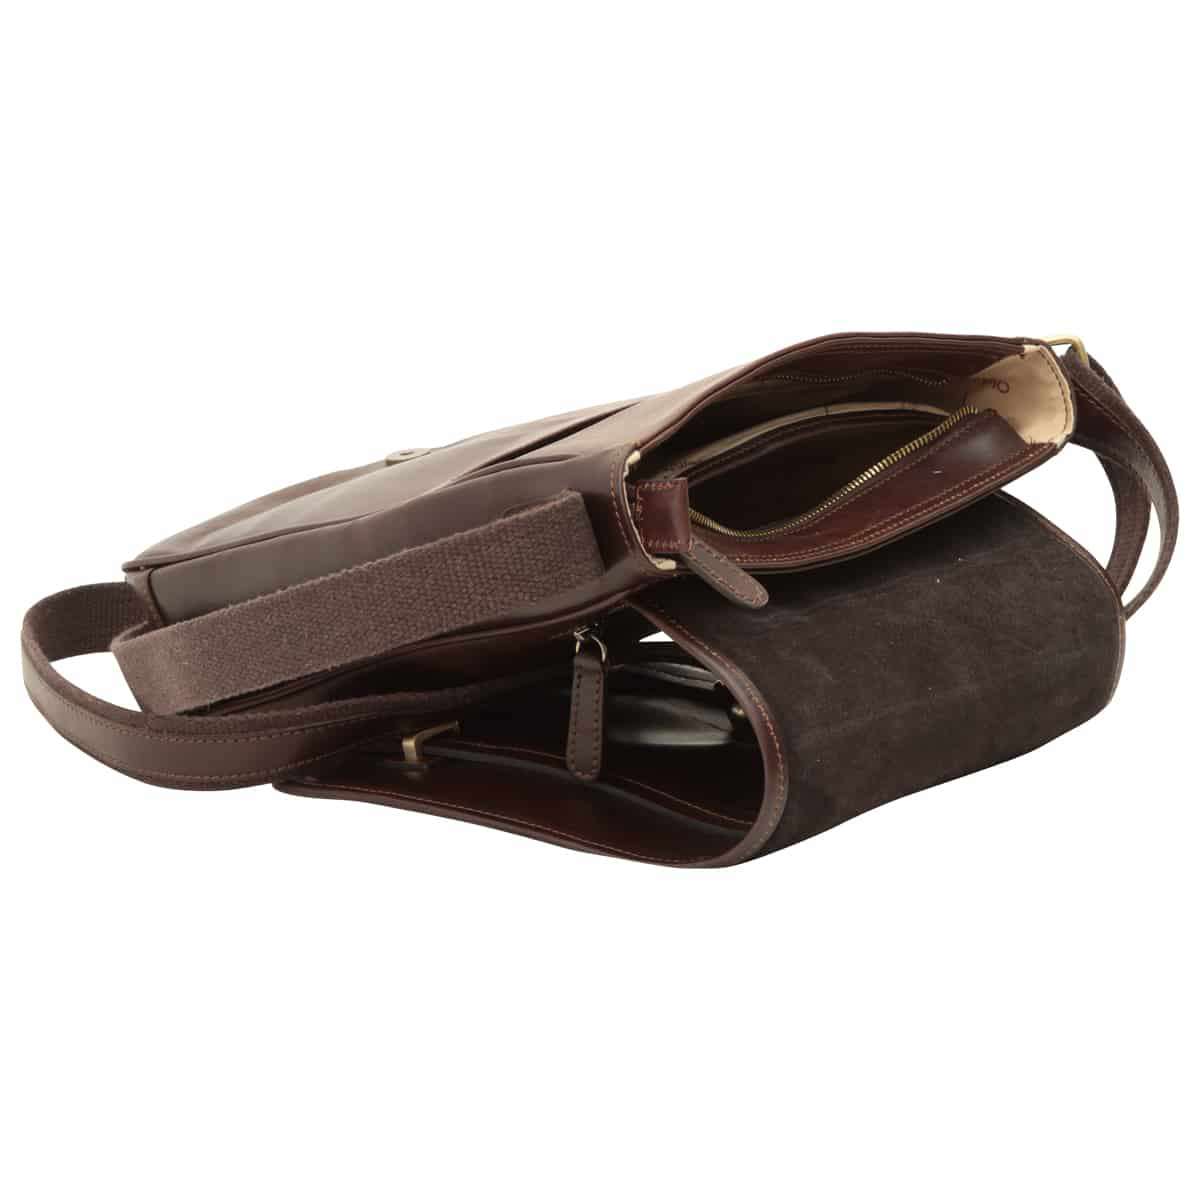 Medium leather bag with double magnetic closure - Dark Brown | 406589TM UK | Old Angler Firenze